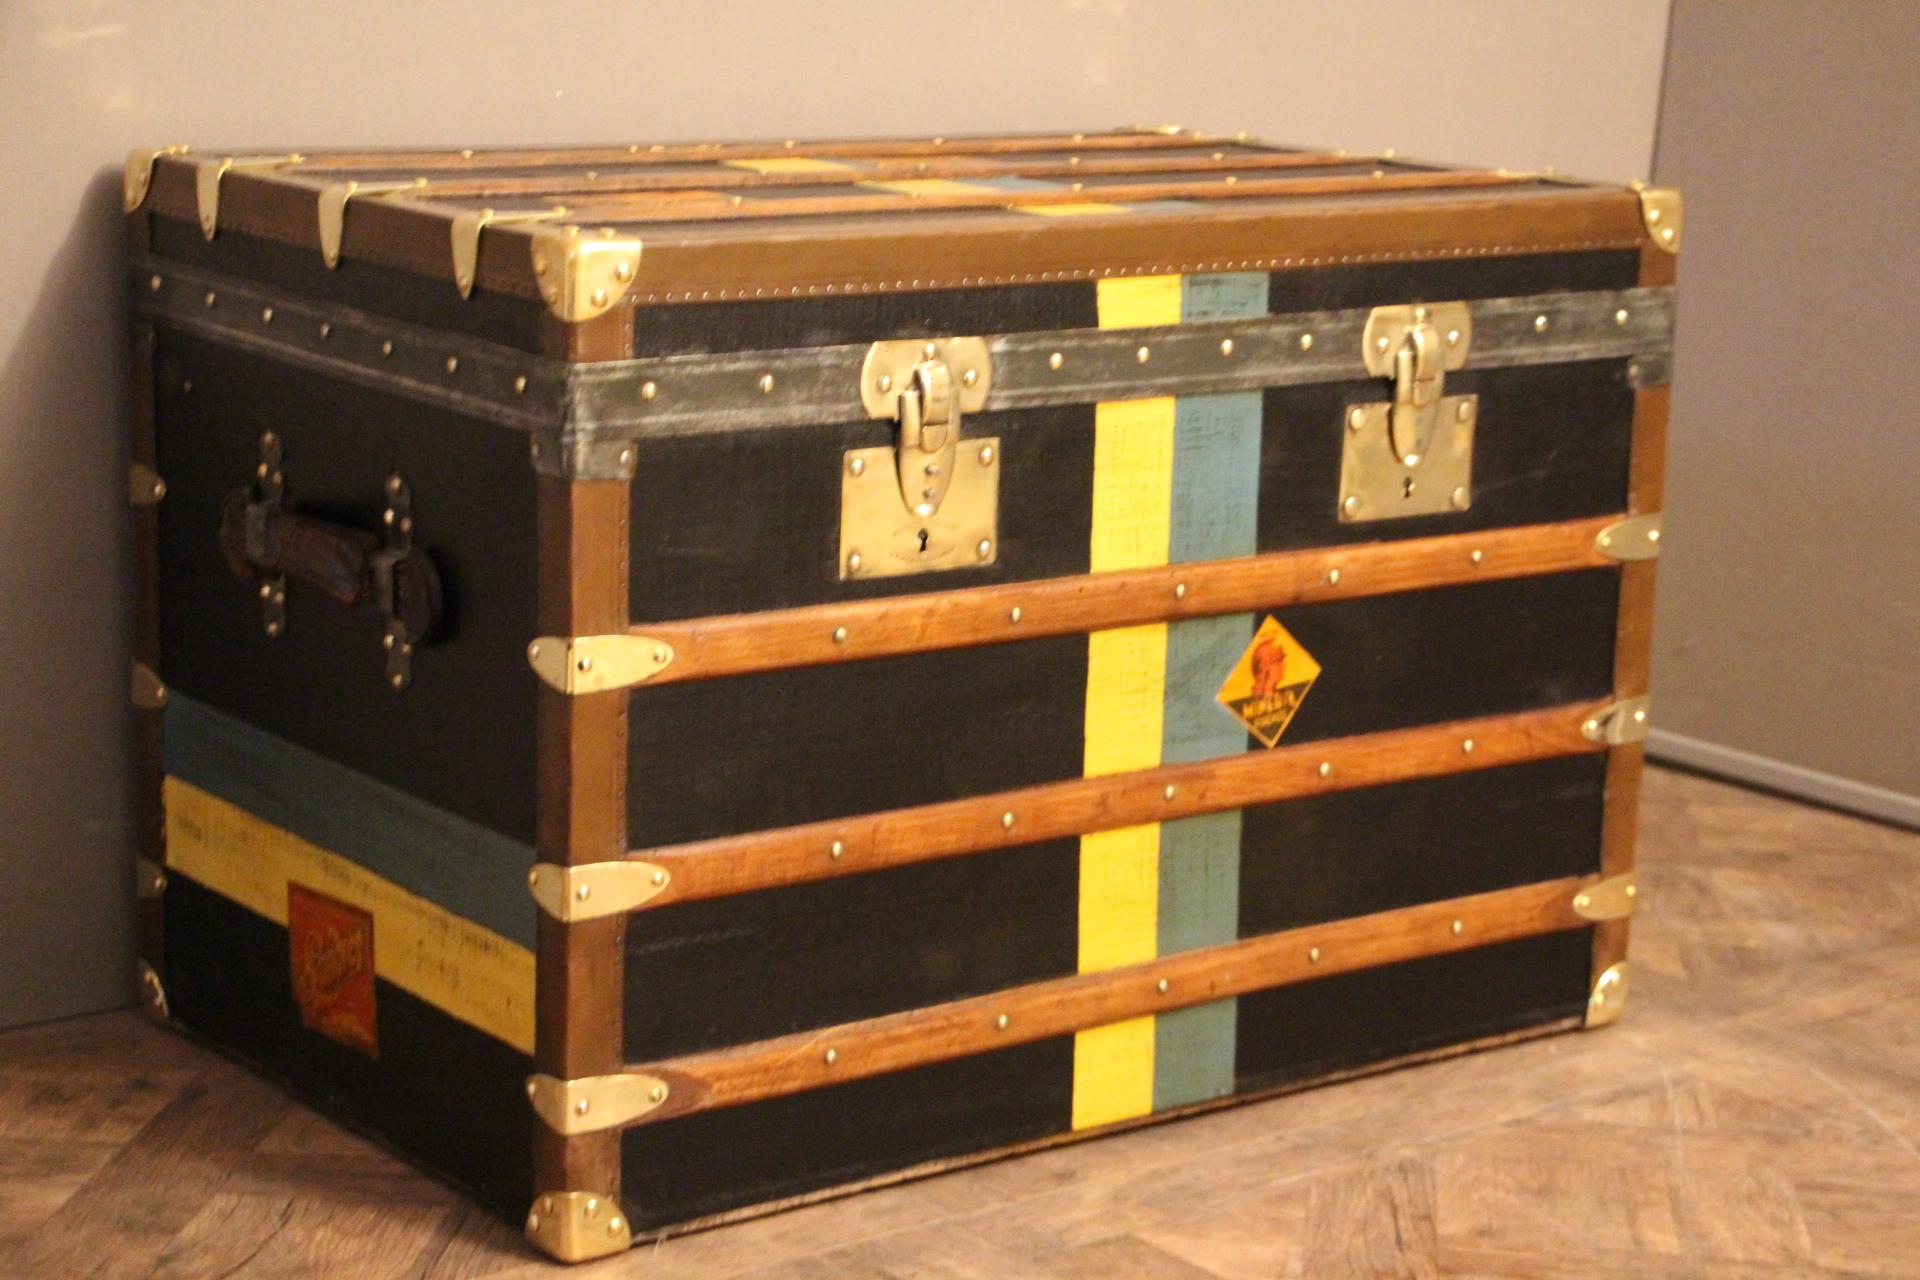 This nice steamer trunk features black canvas, leather trim and side handles and brass corners and locks.
Many travel labels and white yellow and blue stripes of customization.
Its locks as well as its handle latches are marked 